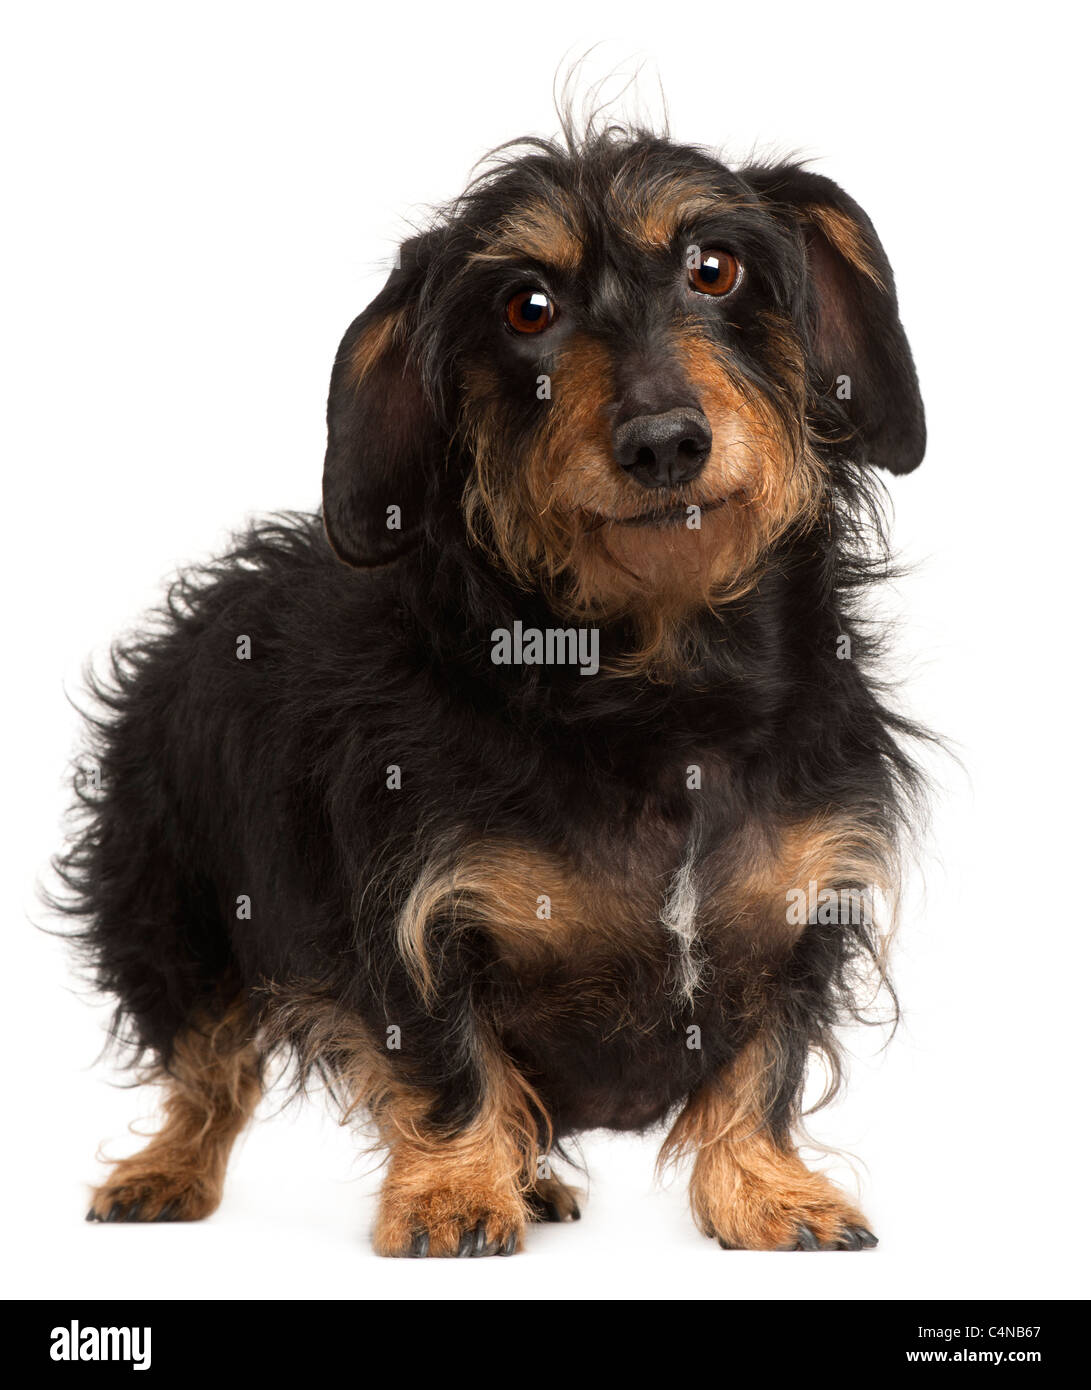 Dachshund, 9 years old, standing in front of white background Stock Photo